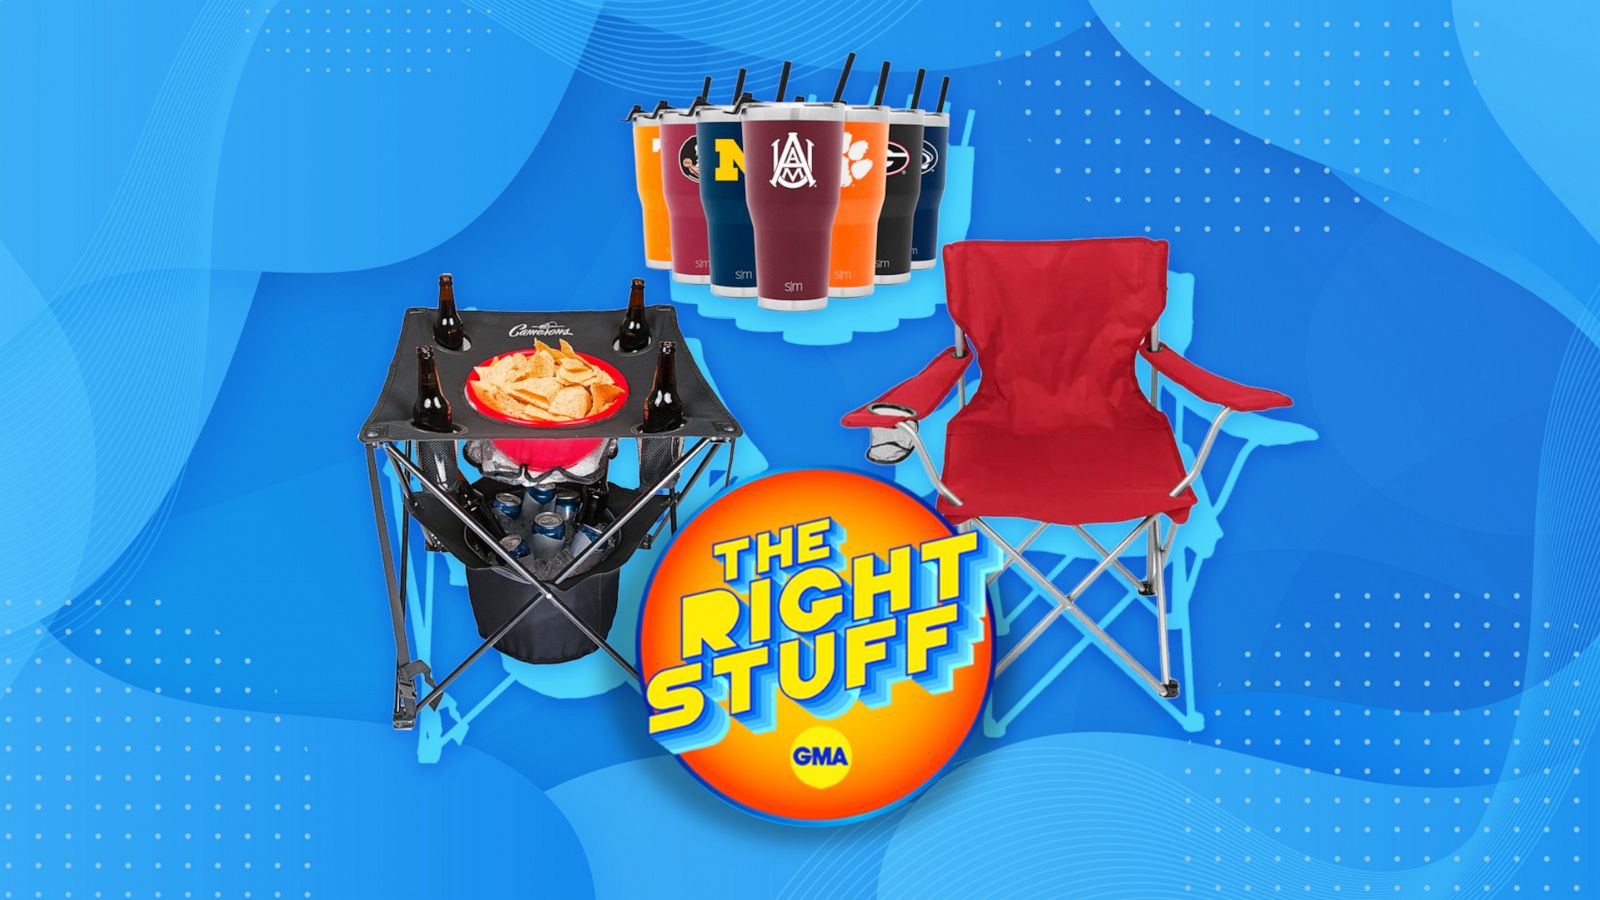 Upgrade your tailgate essentials with these top picks - Good Morning America